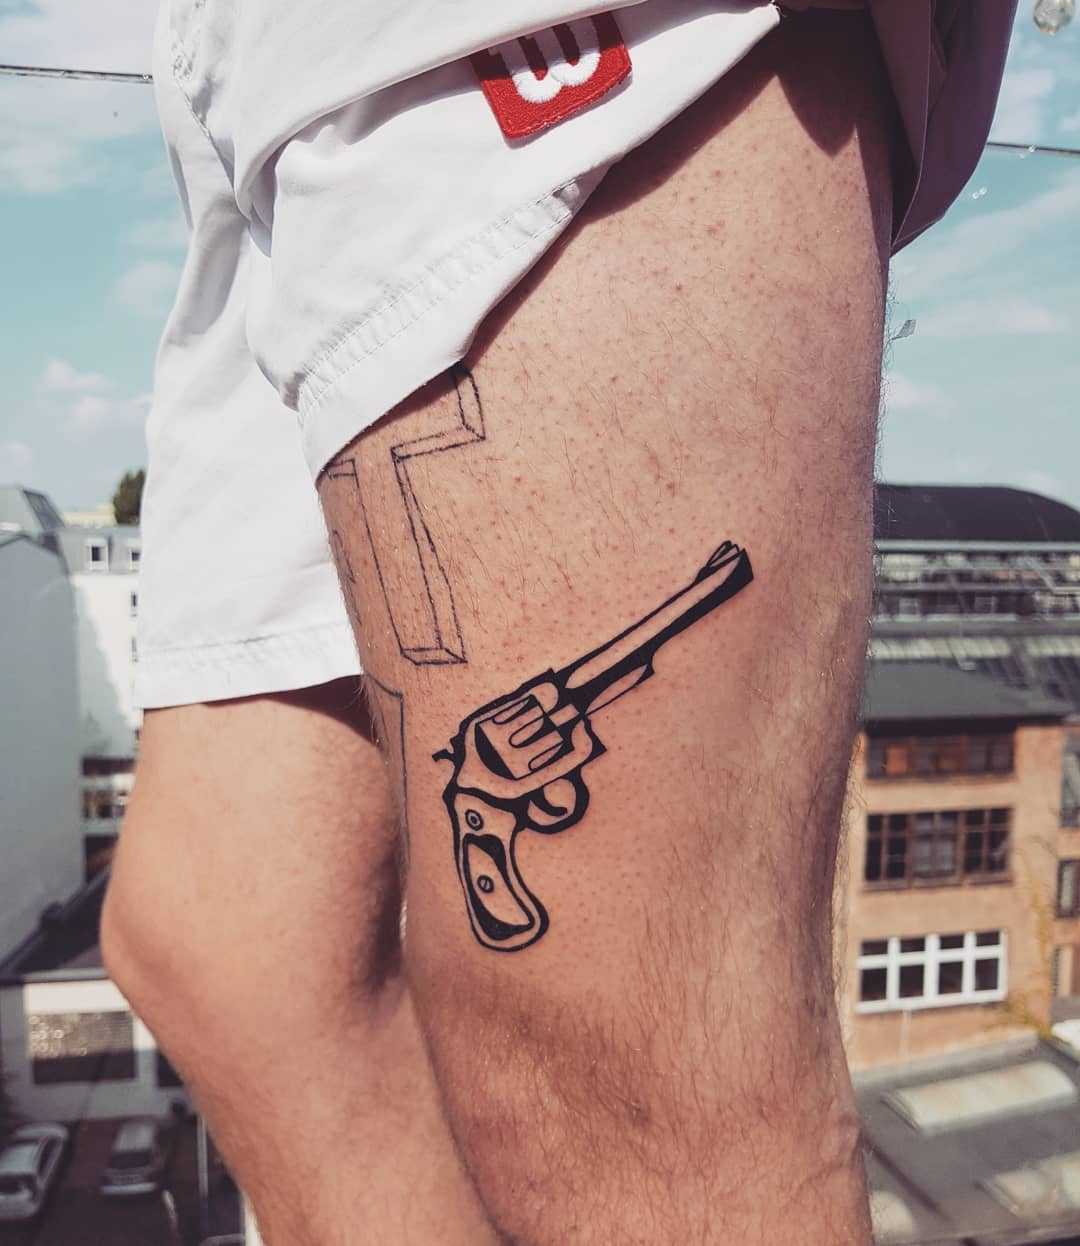 Black and white revolver tattoo on the thigh